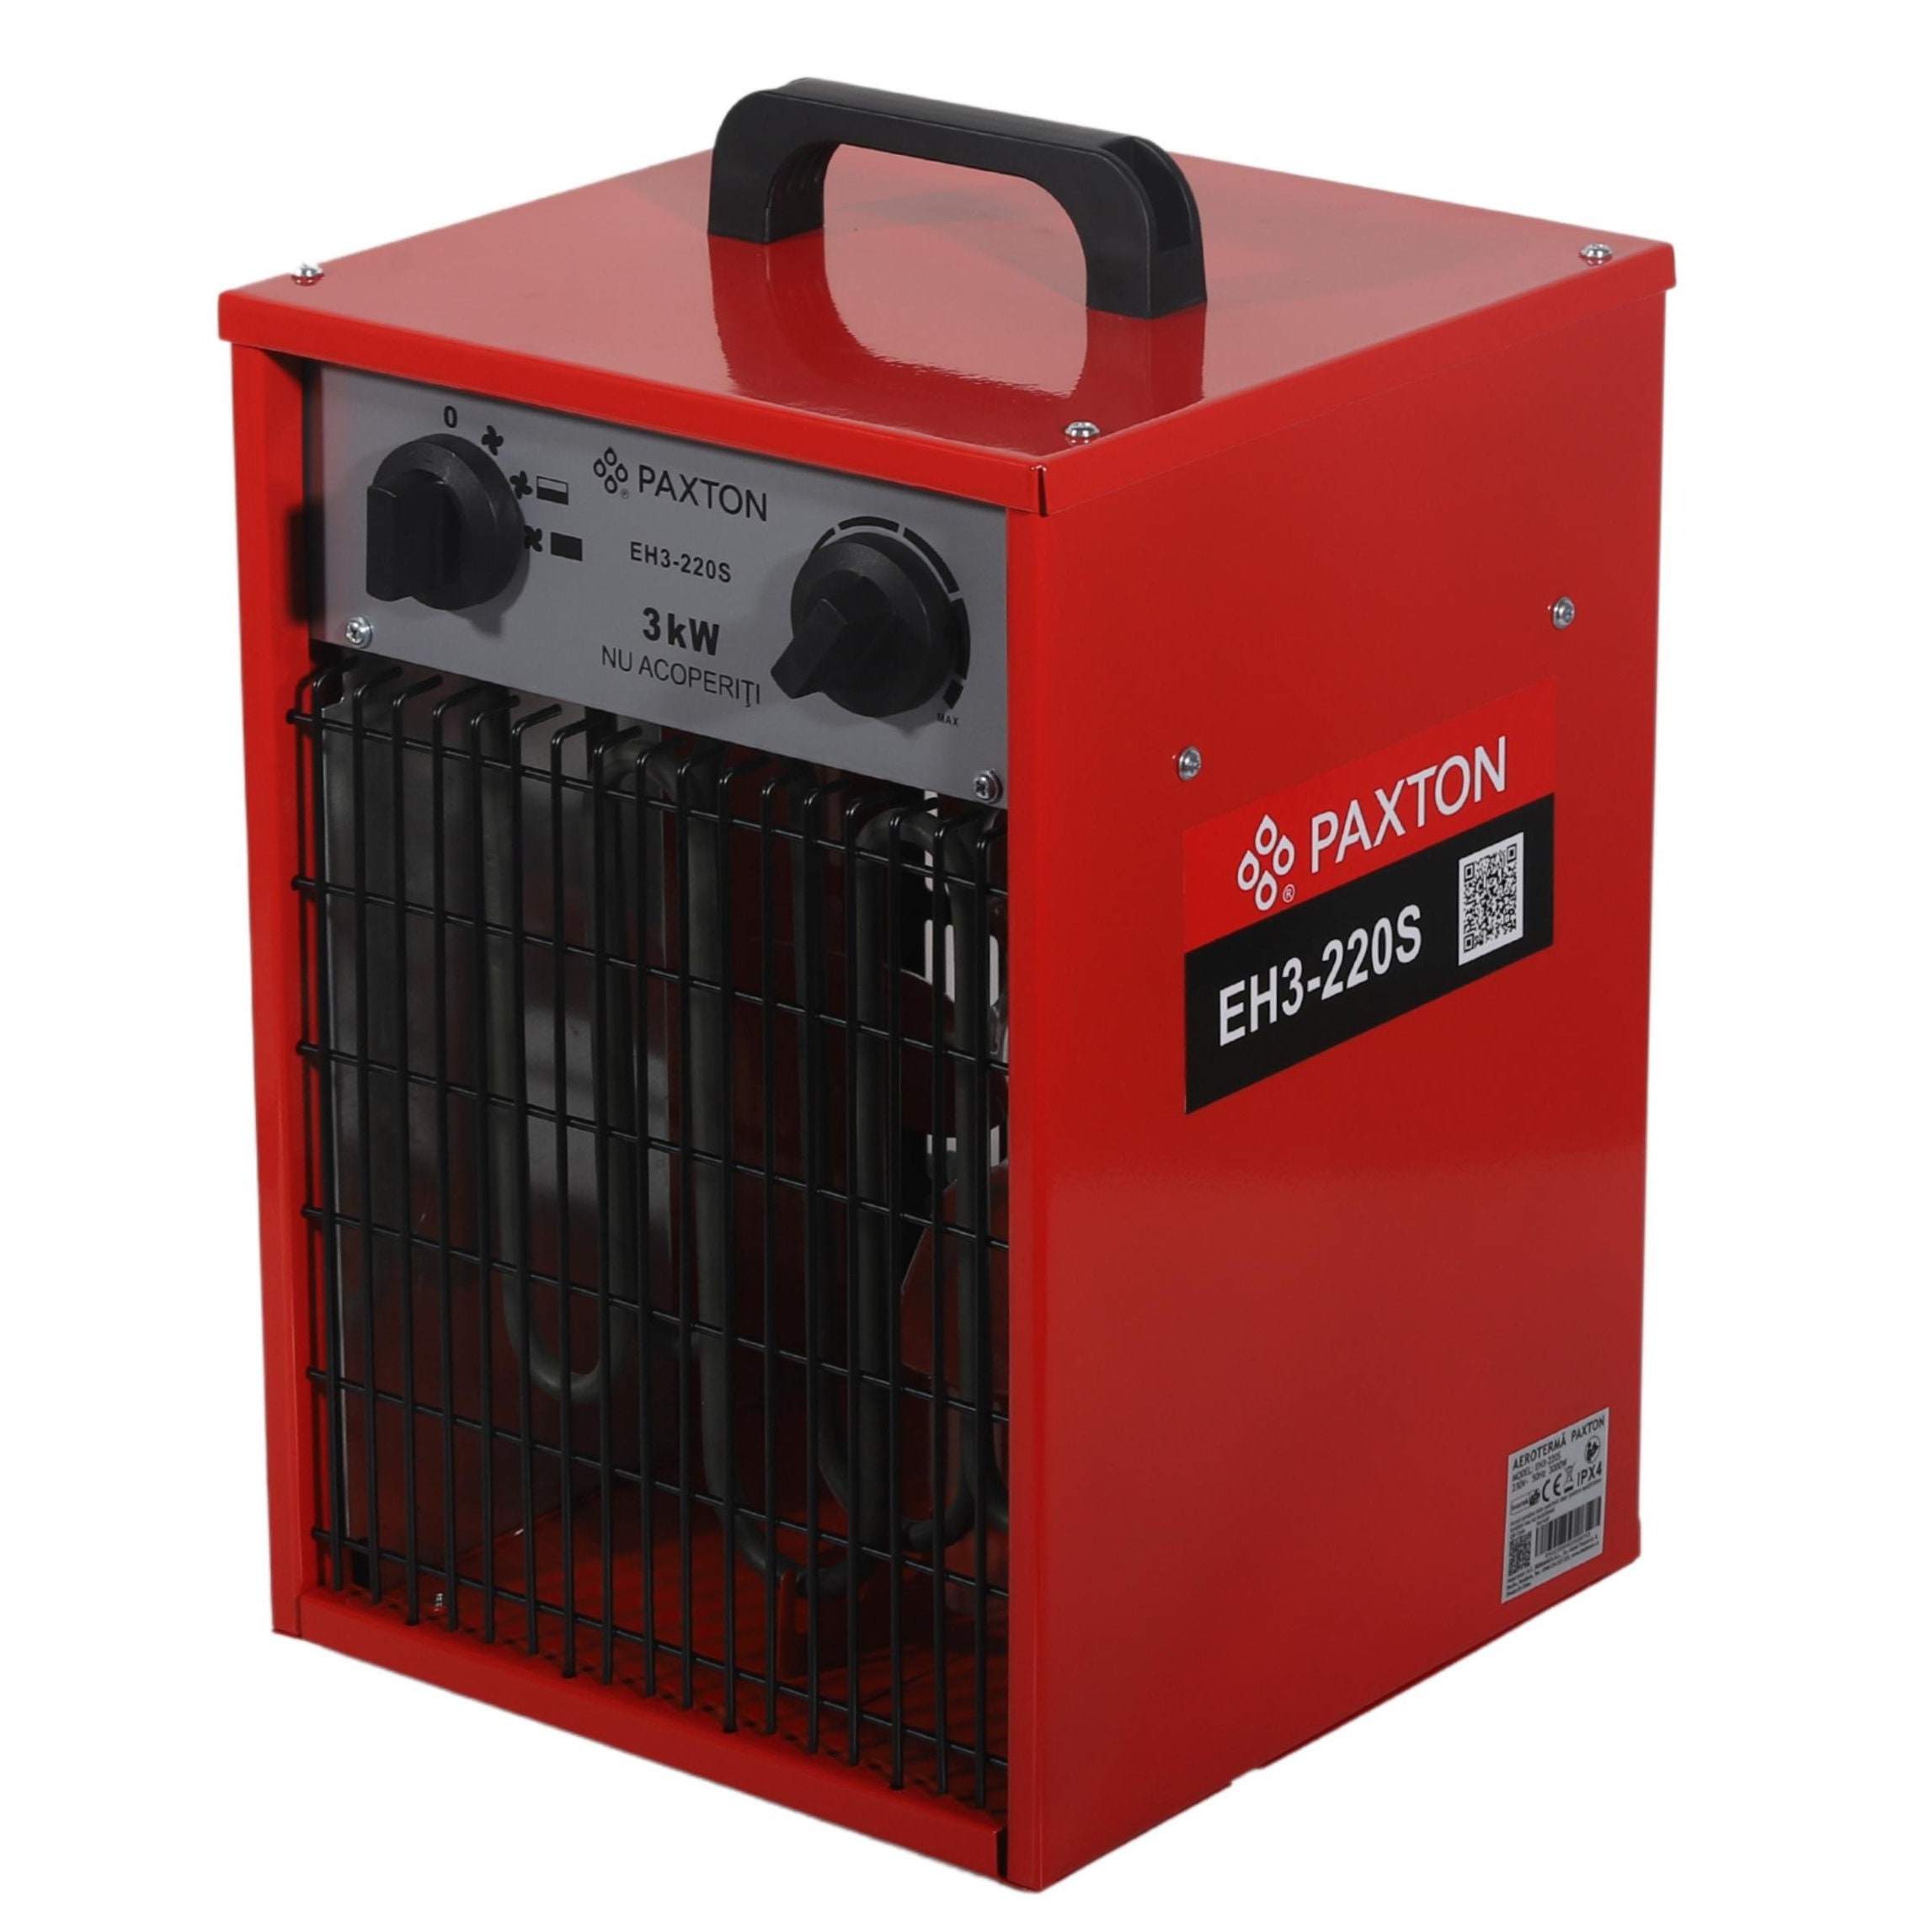 Aeroterma aer cald, electrica, Paxton EH3-220S, 3 kW, 220 -240 V